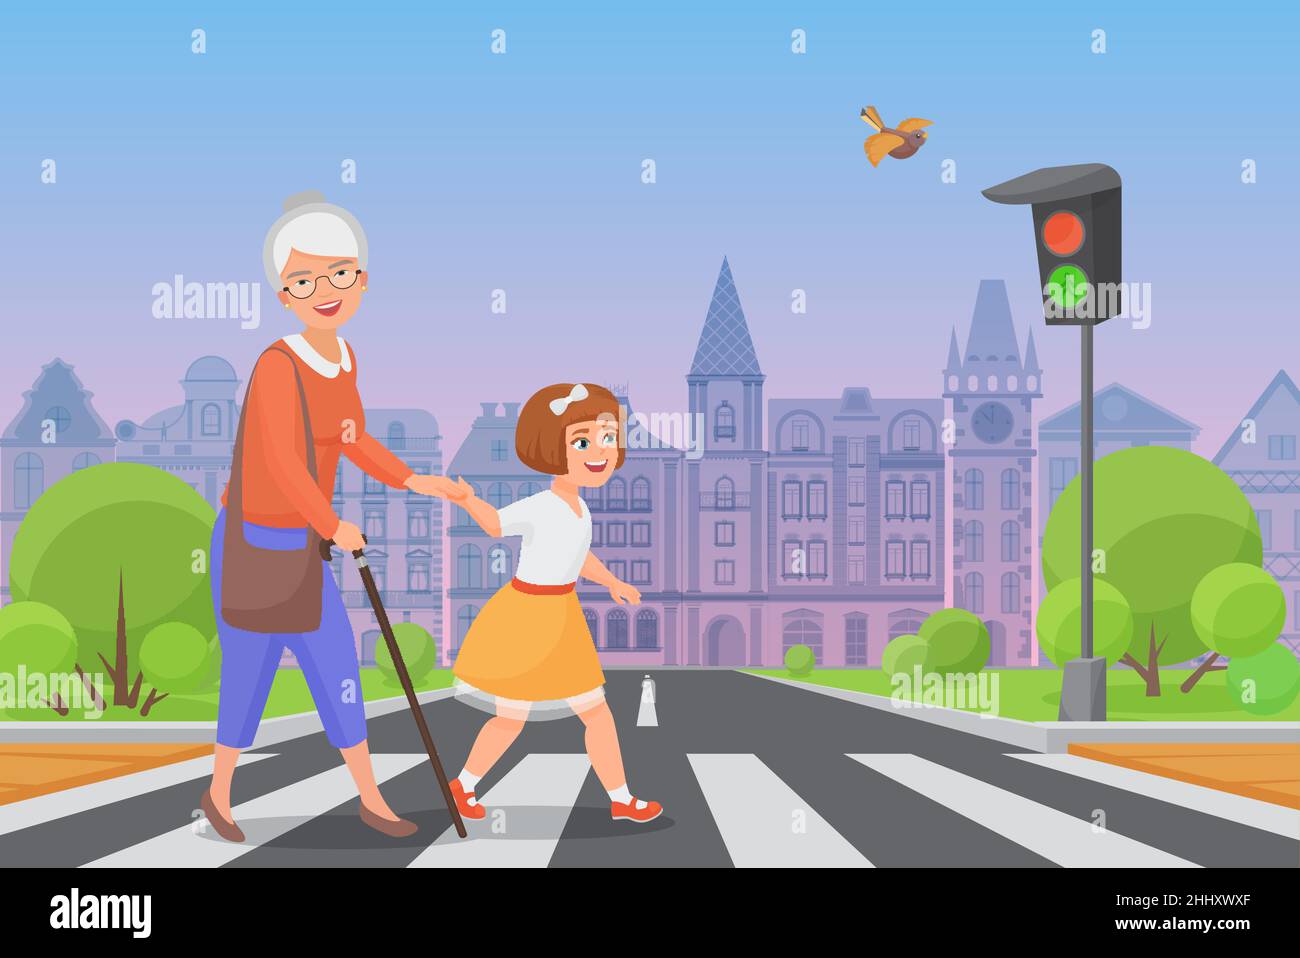 Polite little girl helps smiling old woman to pass the road at a pedestrian crossing while the green light shines. Color vector illustration Stock Vector